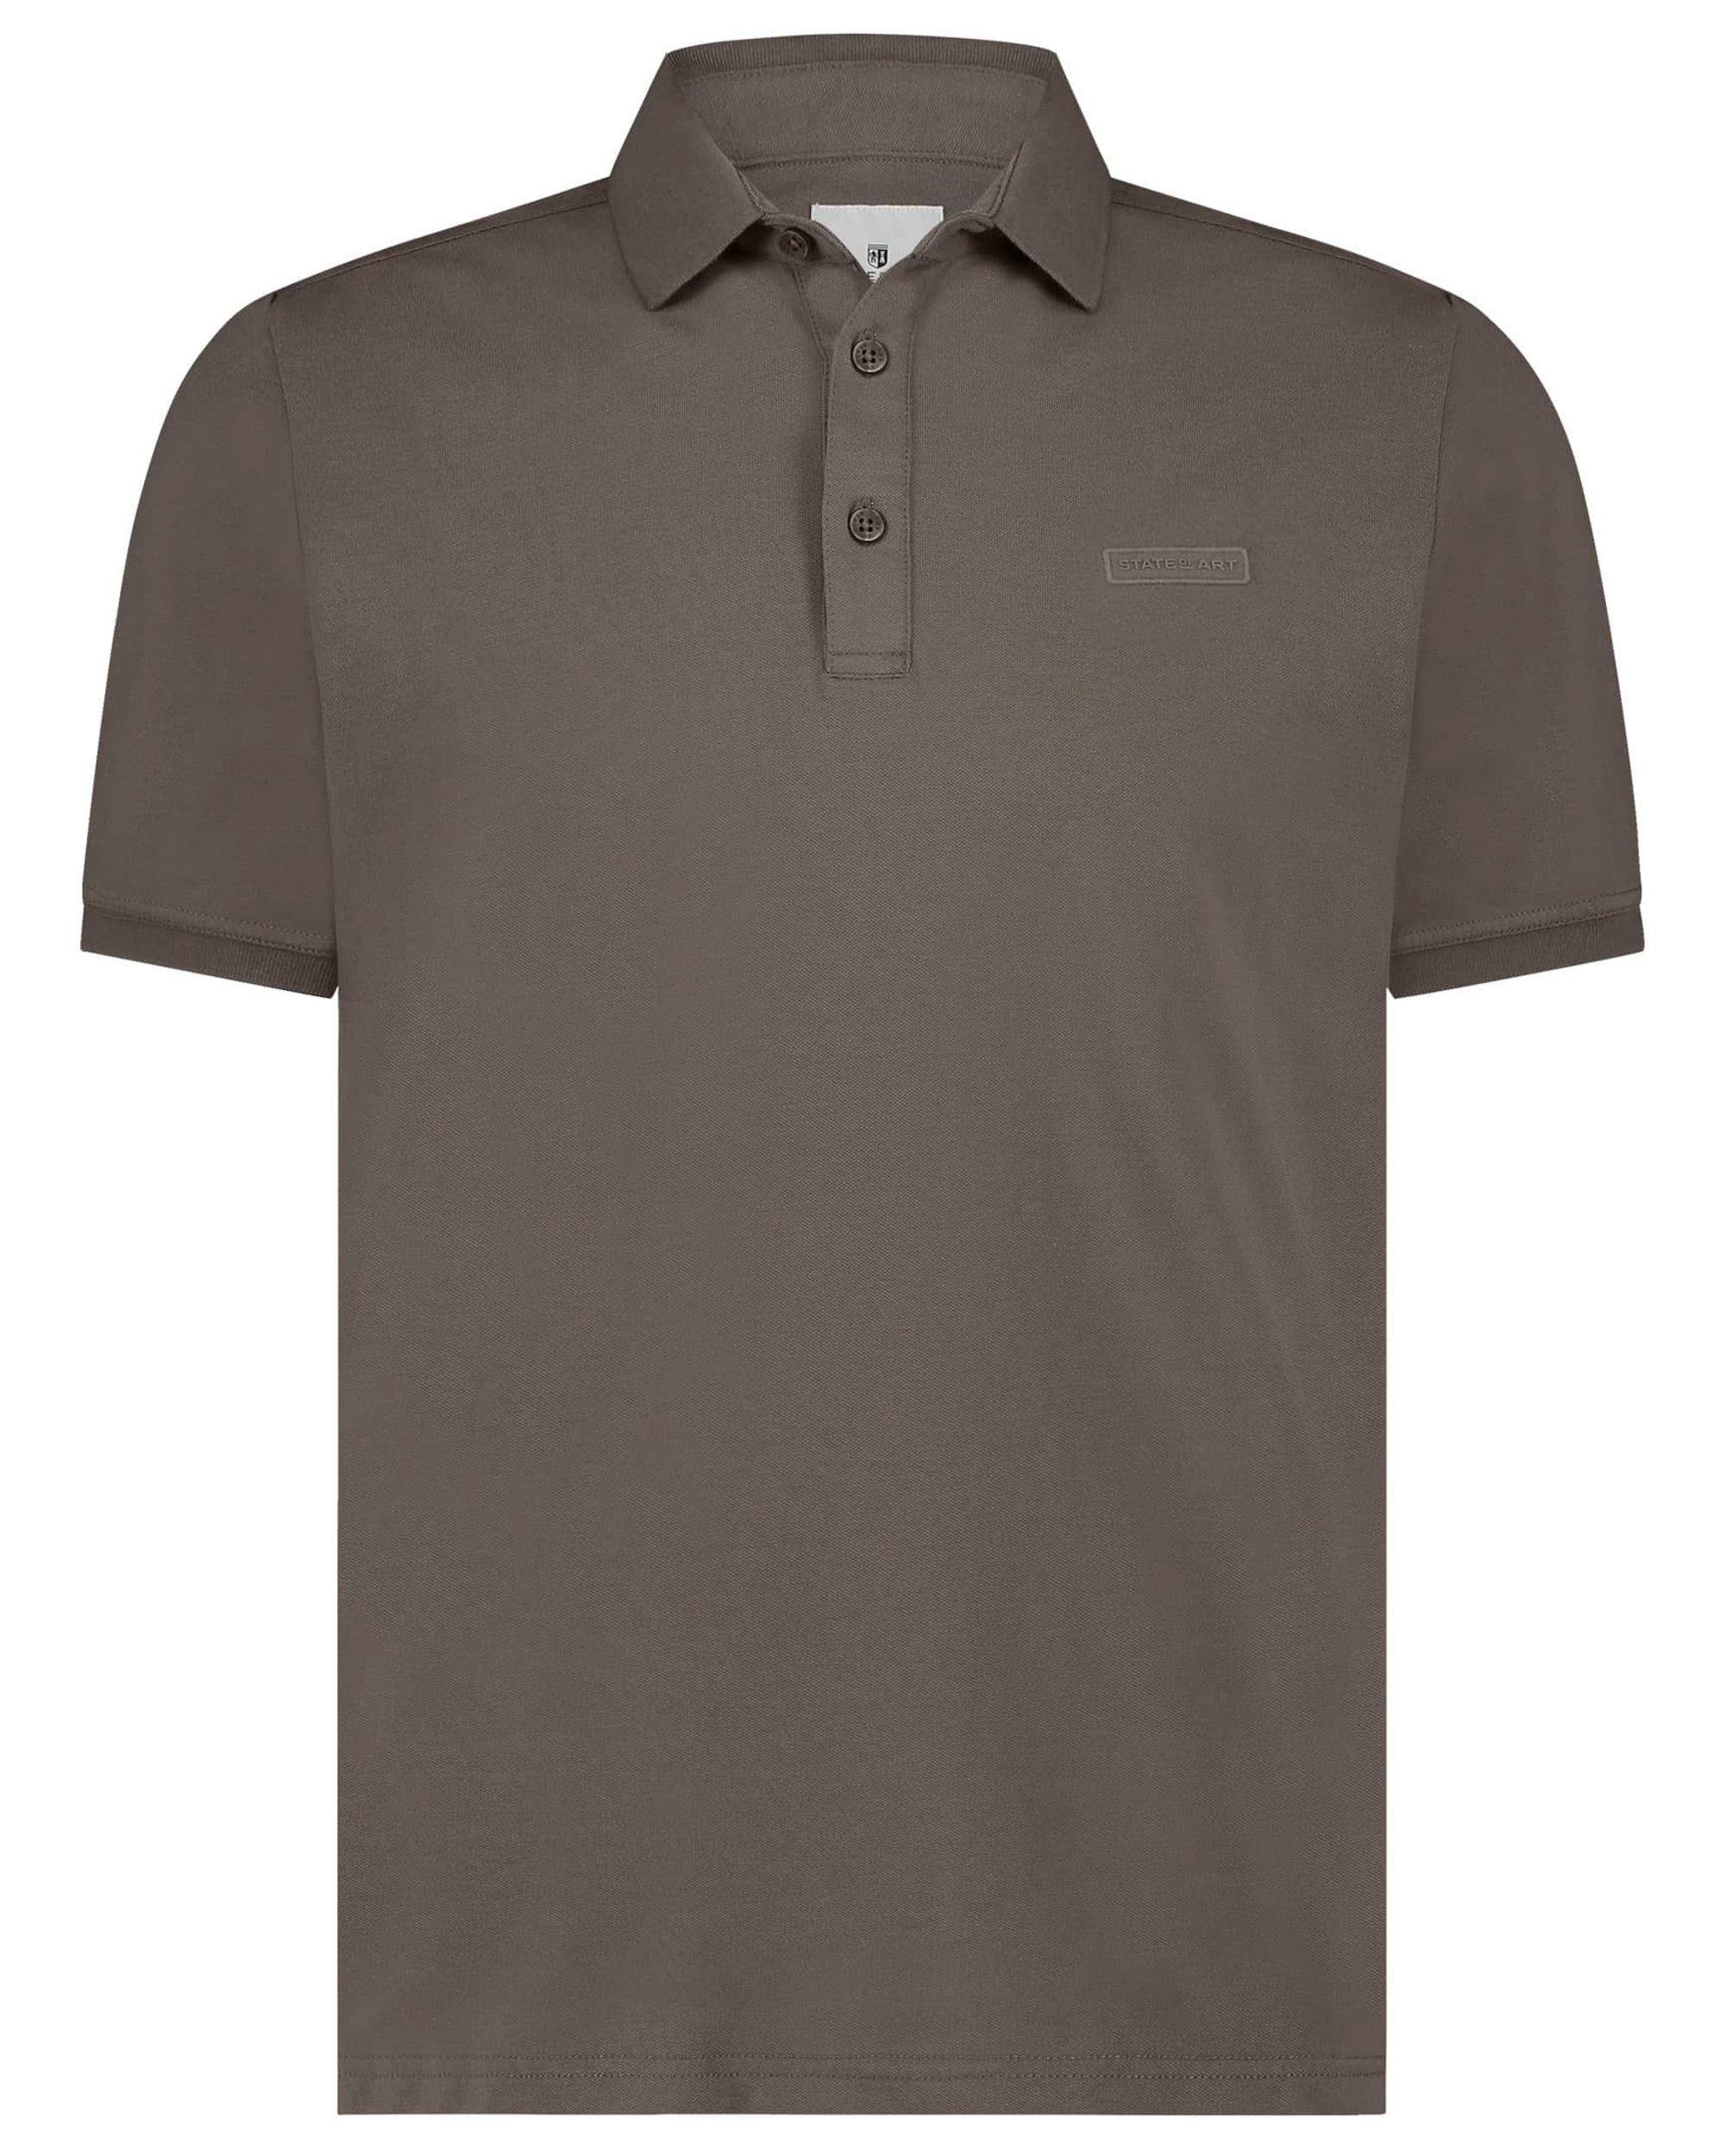 State of Art Polo KM Bruin 093437-002-4XL